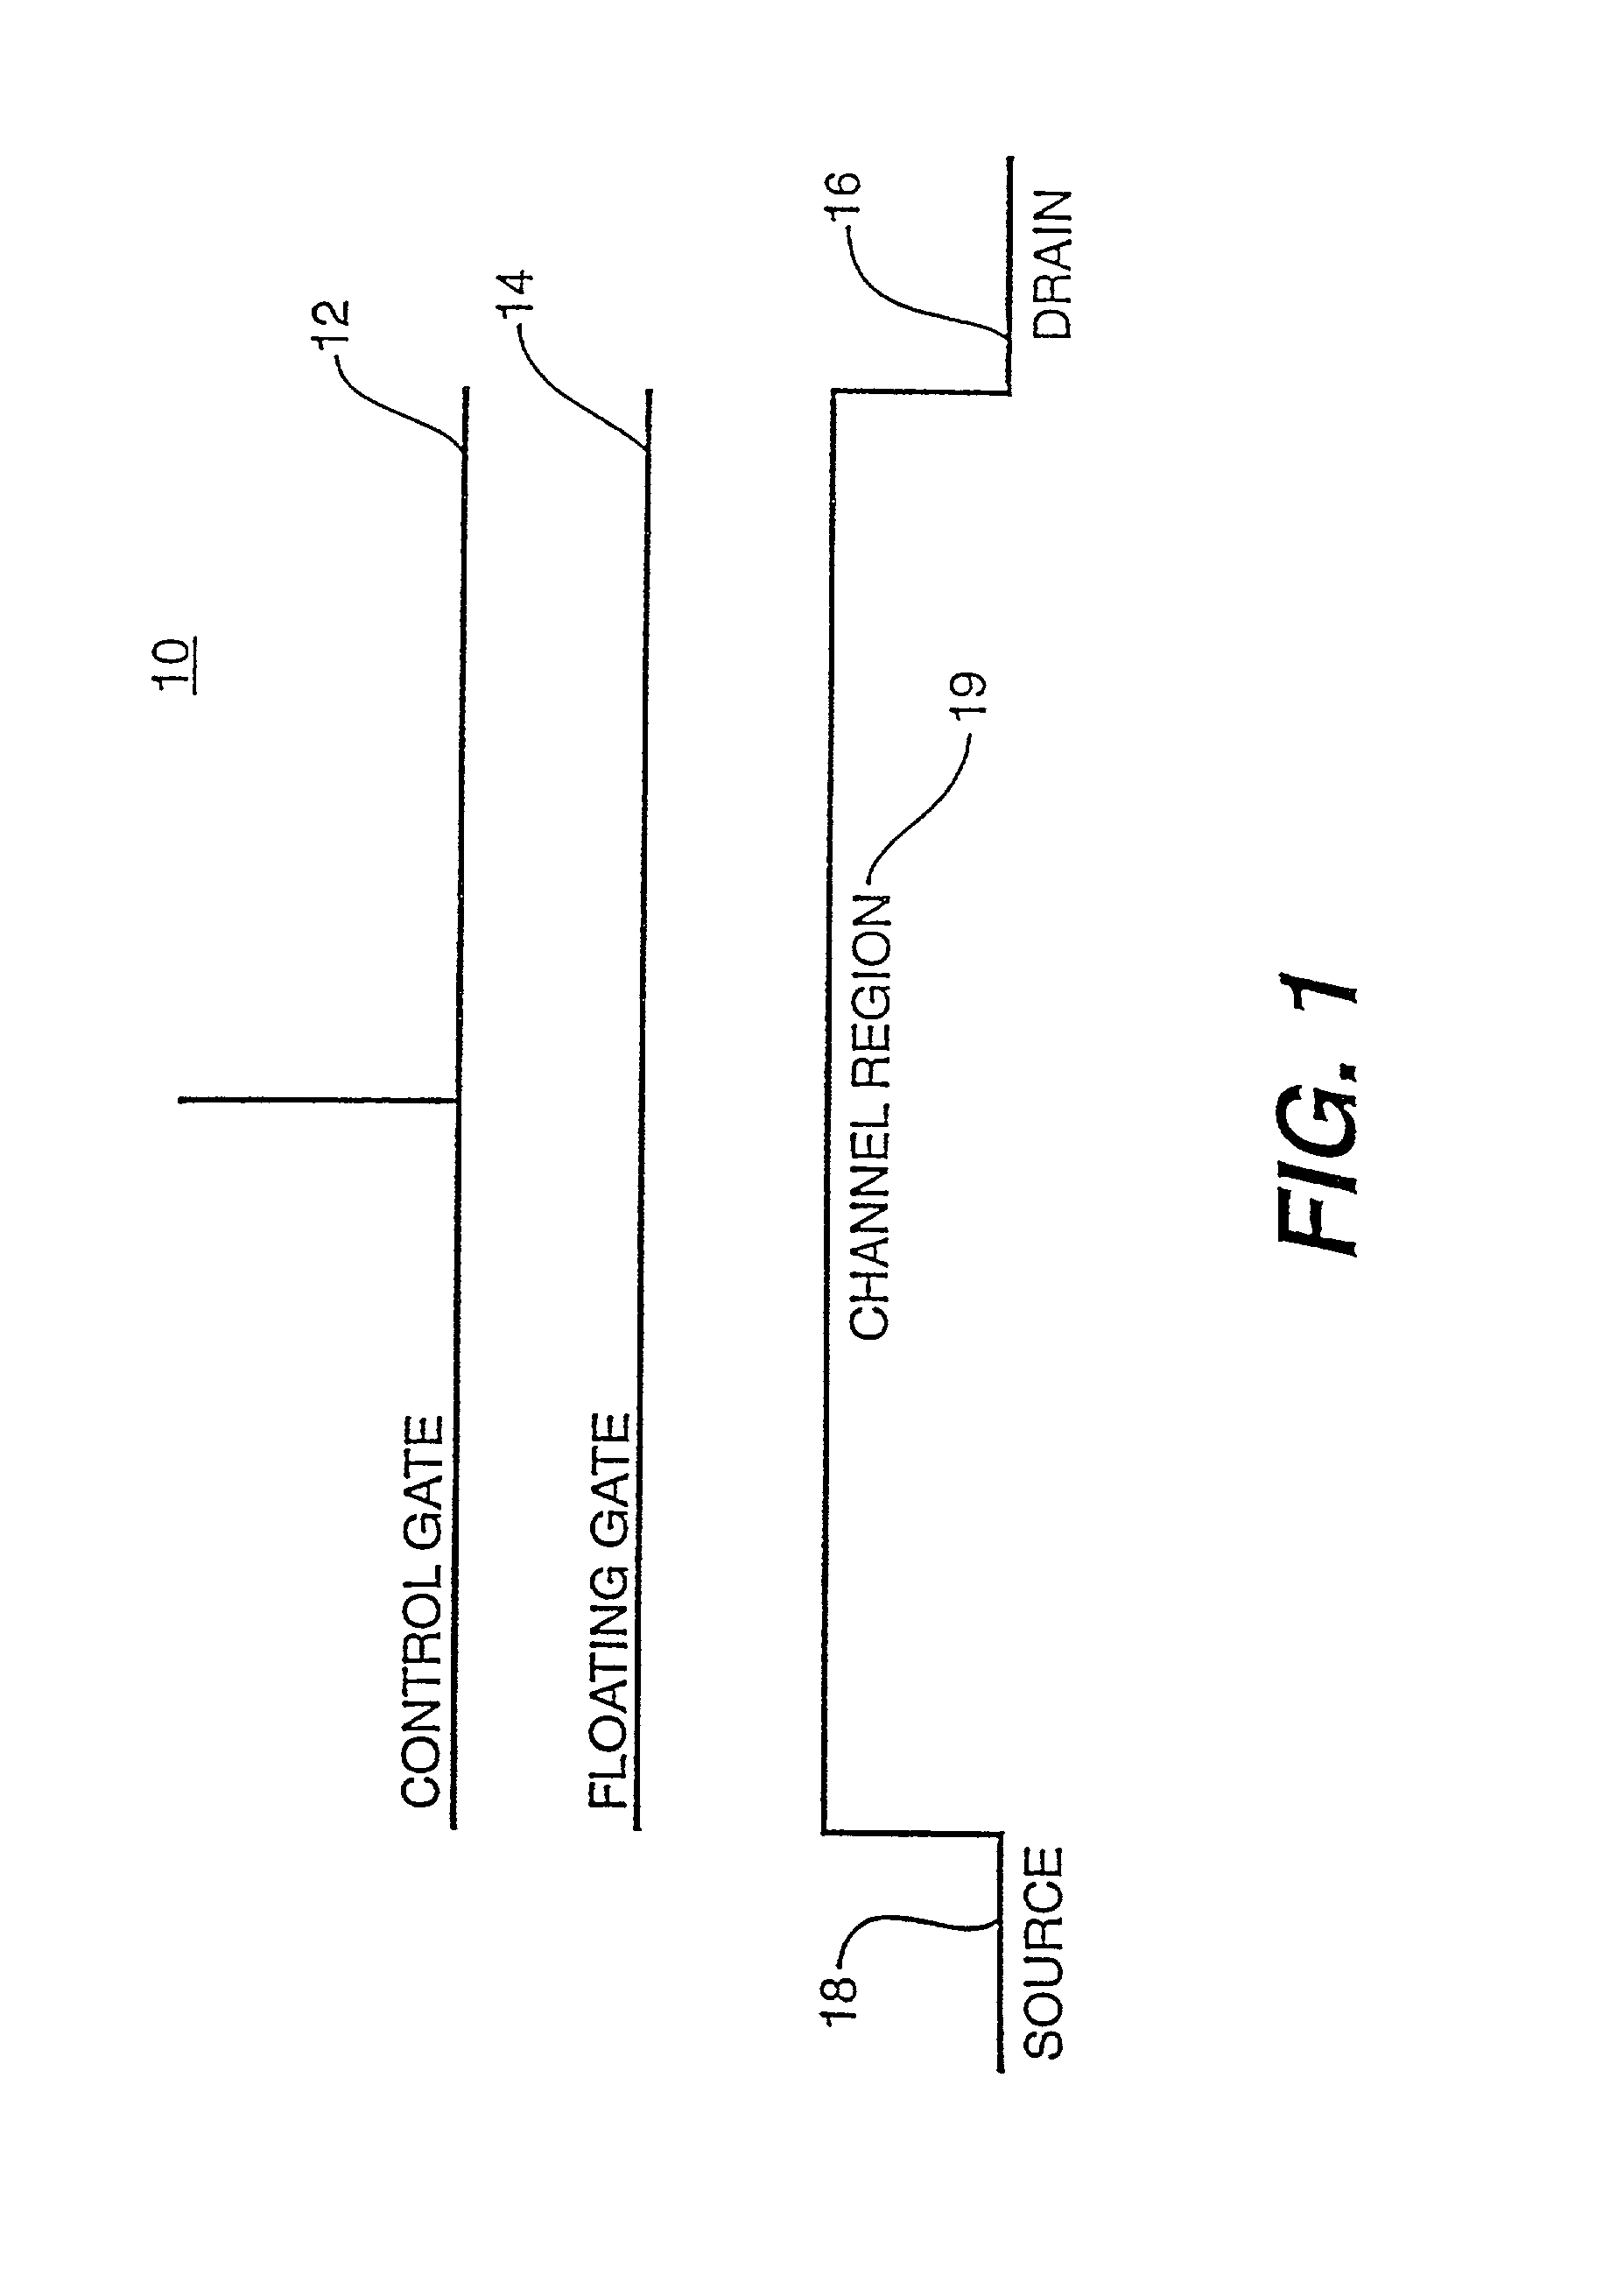 Electrically alterable non-volatile memory with n-bits per cell